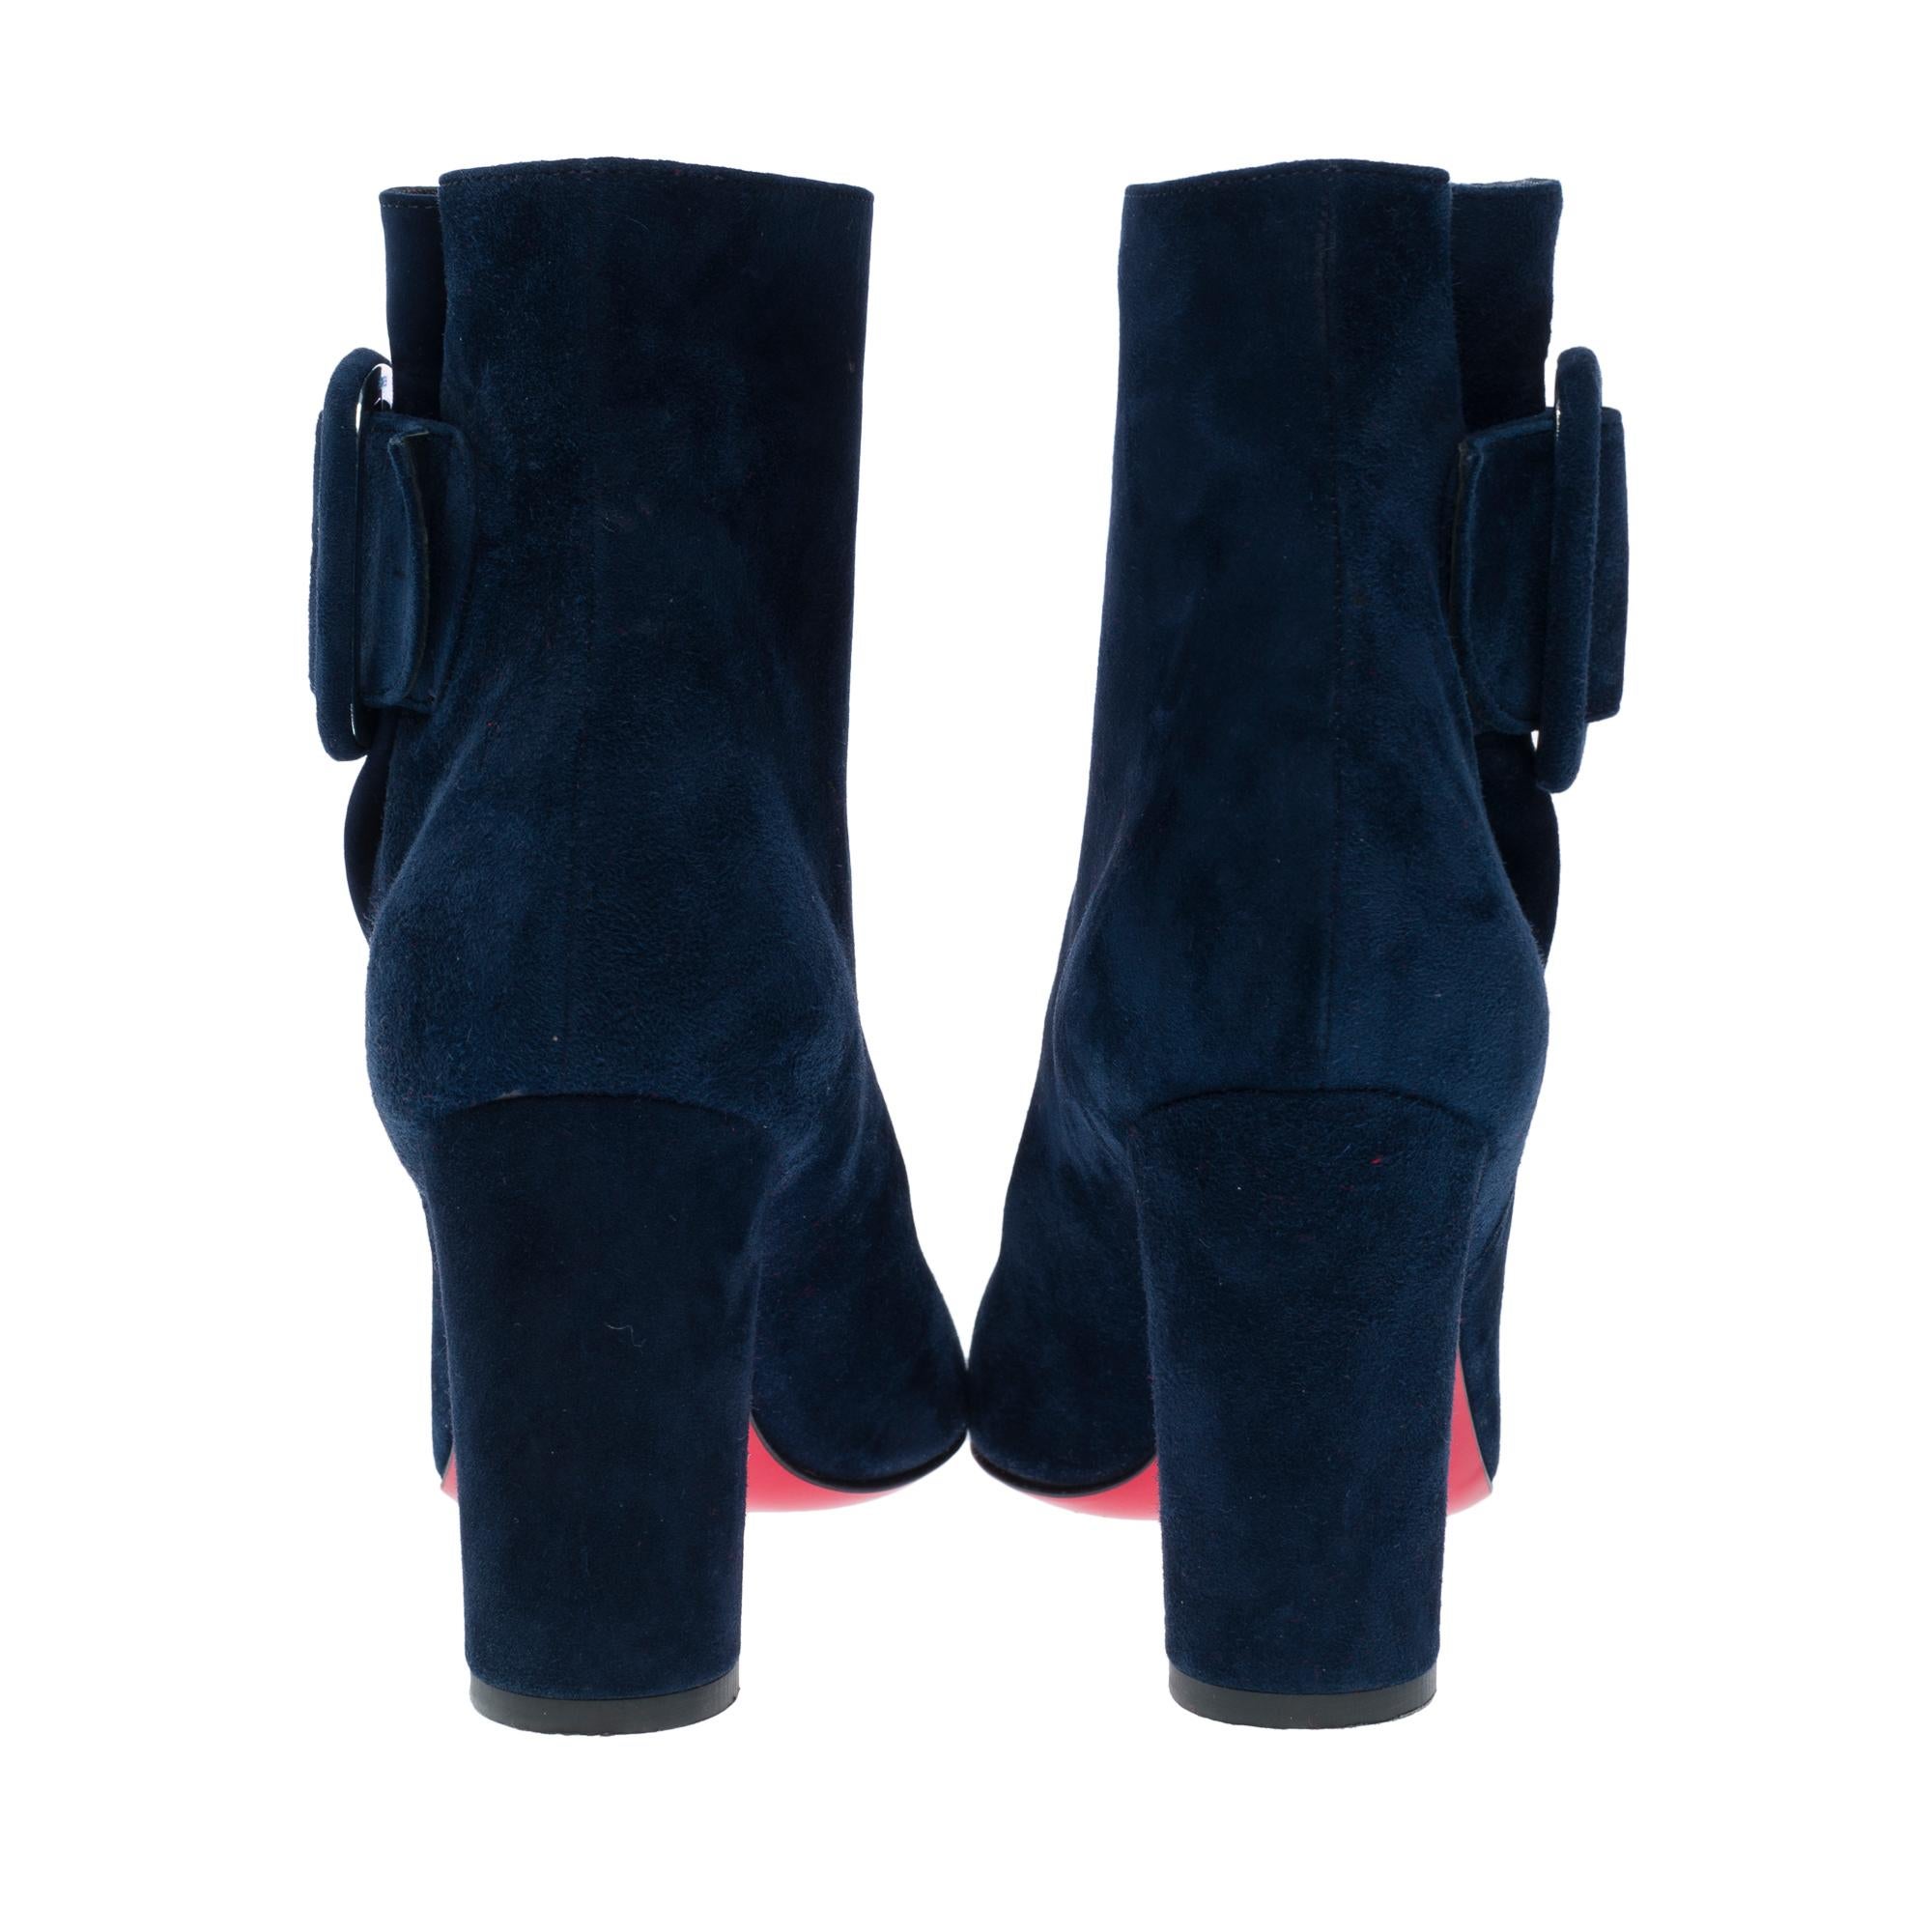 Women's Christian Louboutin ankleboot in blue suede, size 37 For Sale